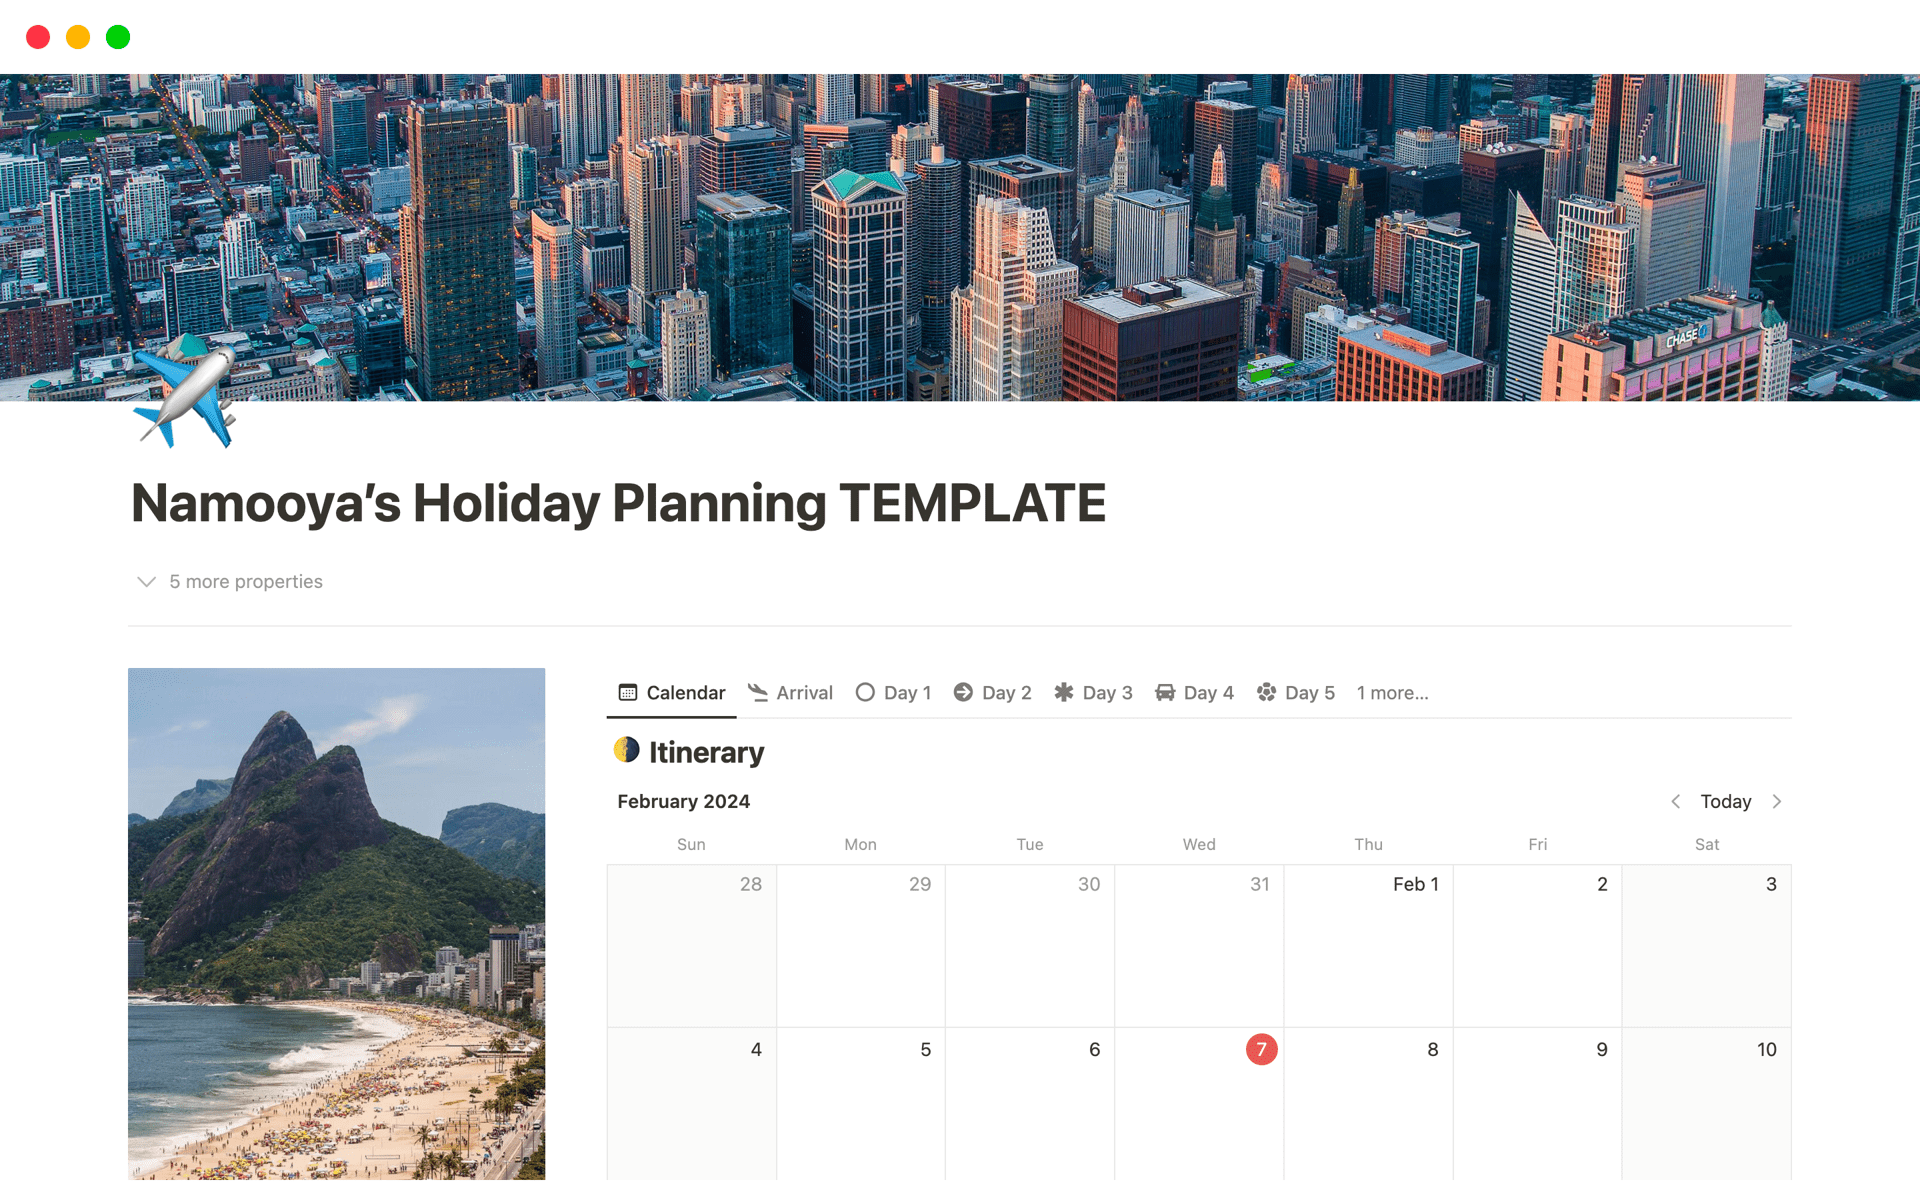 A template preview for Namooya’s Holiday Planning